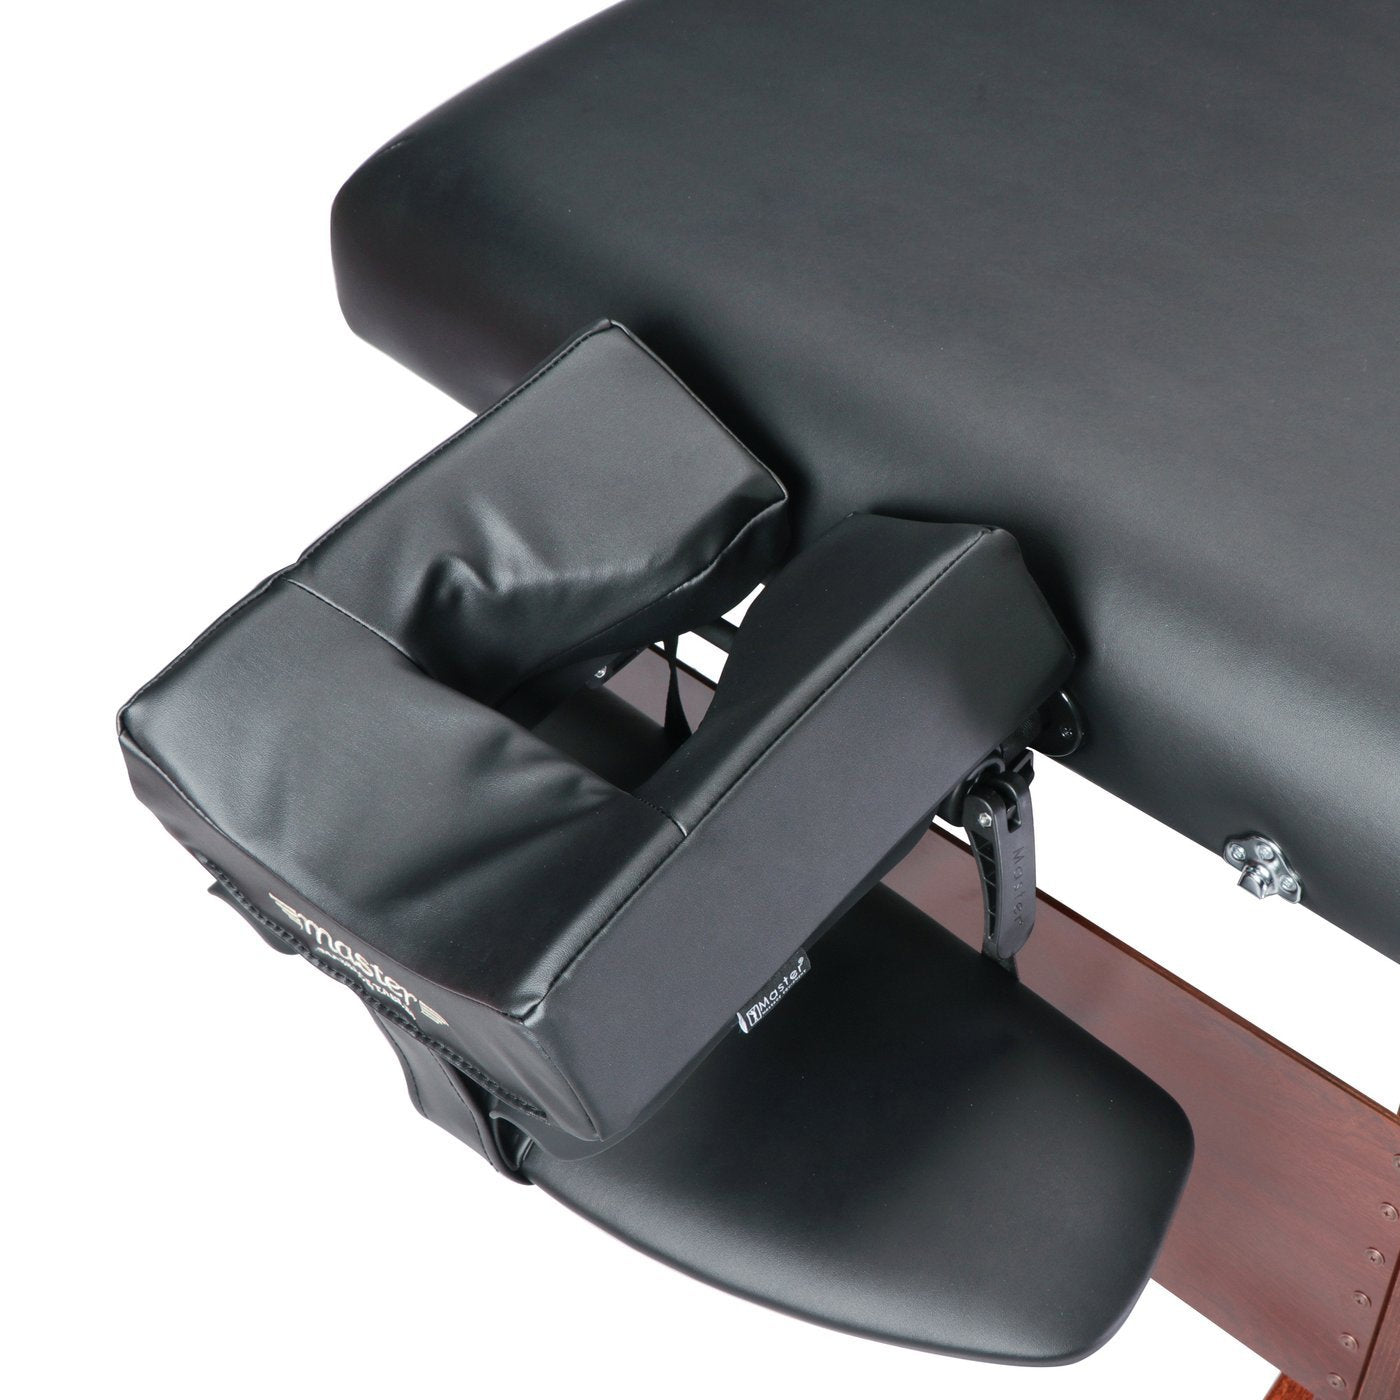 30" DEL RAY™ Portable Massage Table Package with 3" Thick Cushion of Foam for Ultimate Comfort! (Black Color)